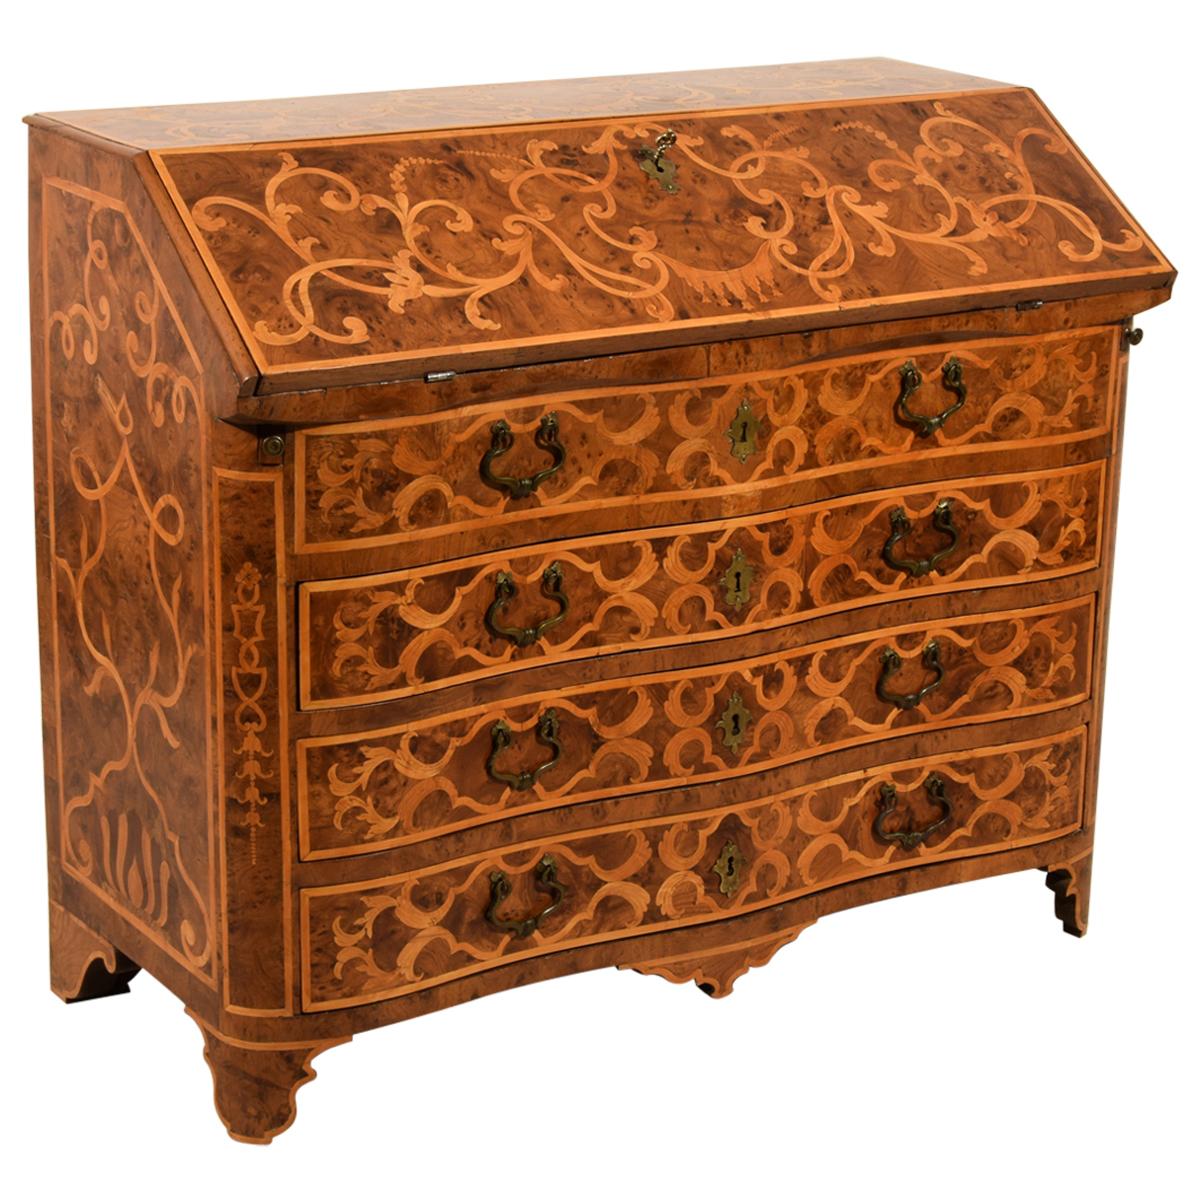 18th Century, Italian Inlaid Wood Chest of Drawers with Secretaire For Sale